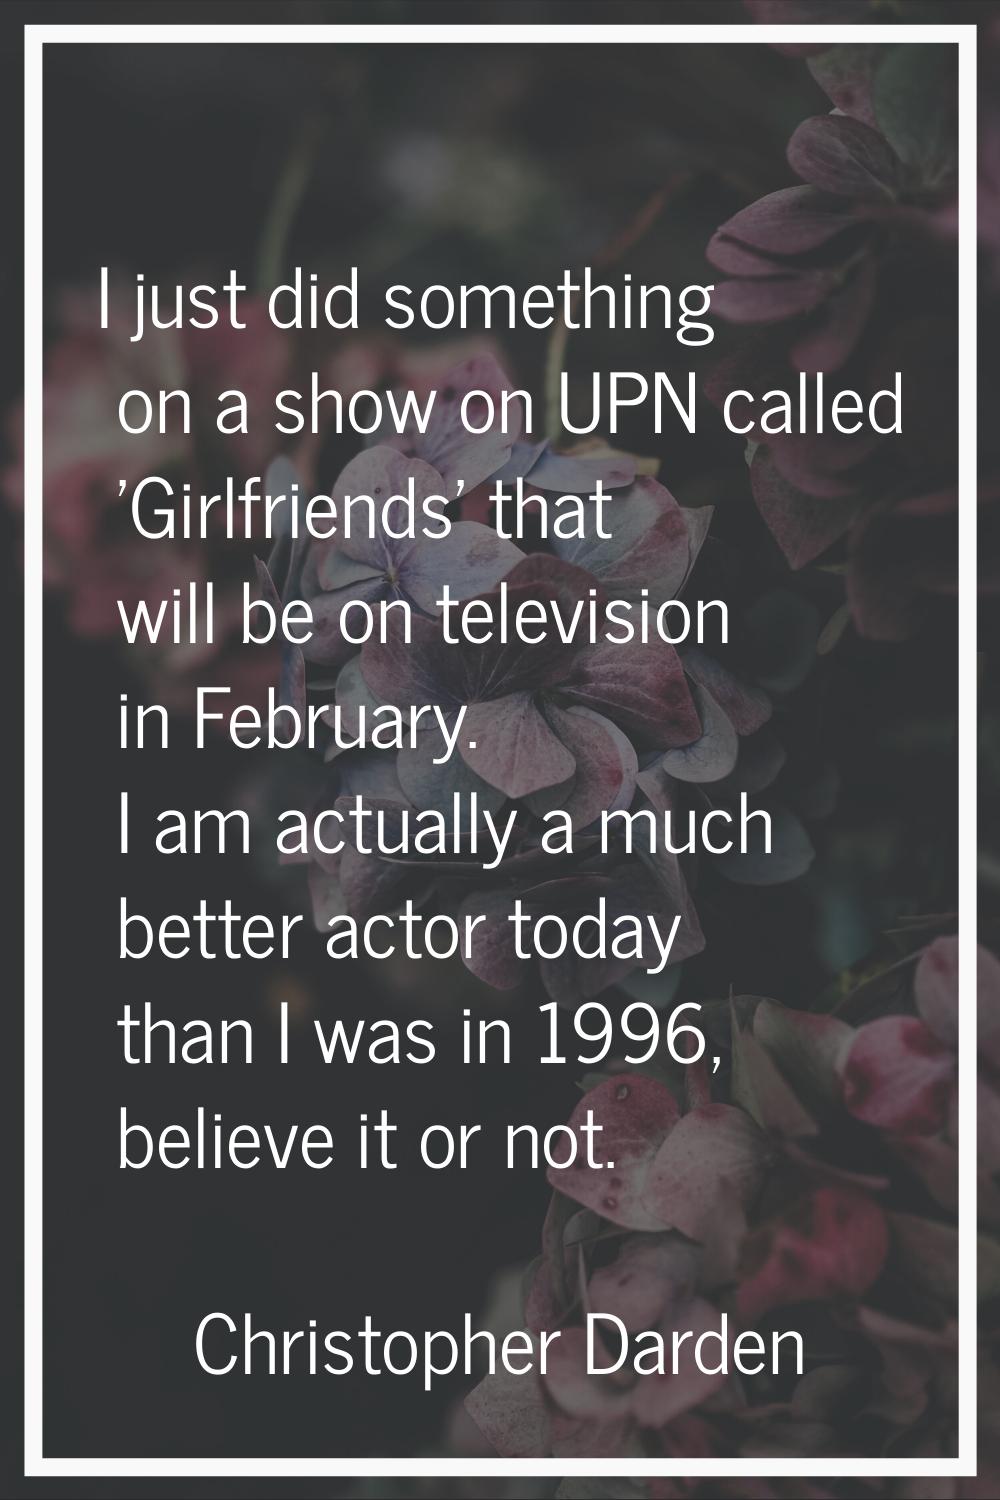 I just did something on a show on UPN called 'Girlfriends' that will be on television in February. 